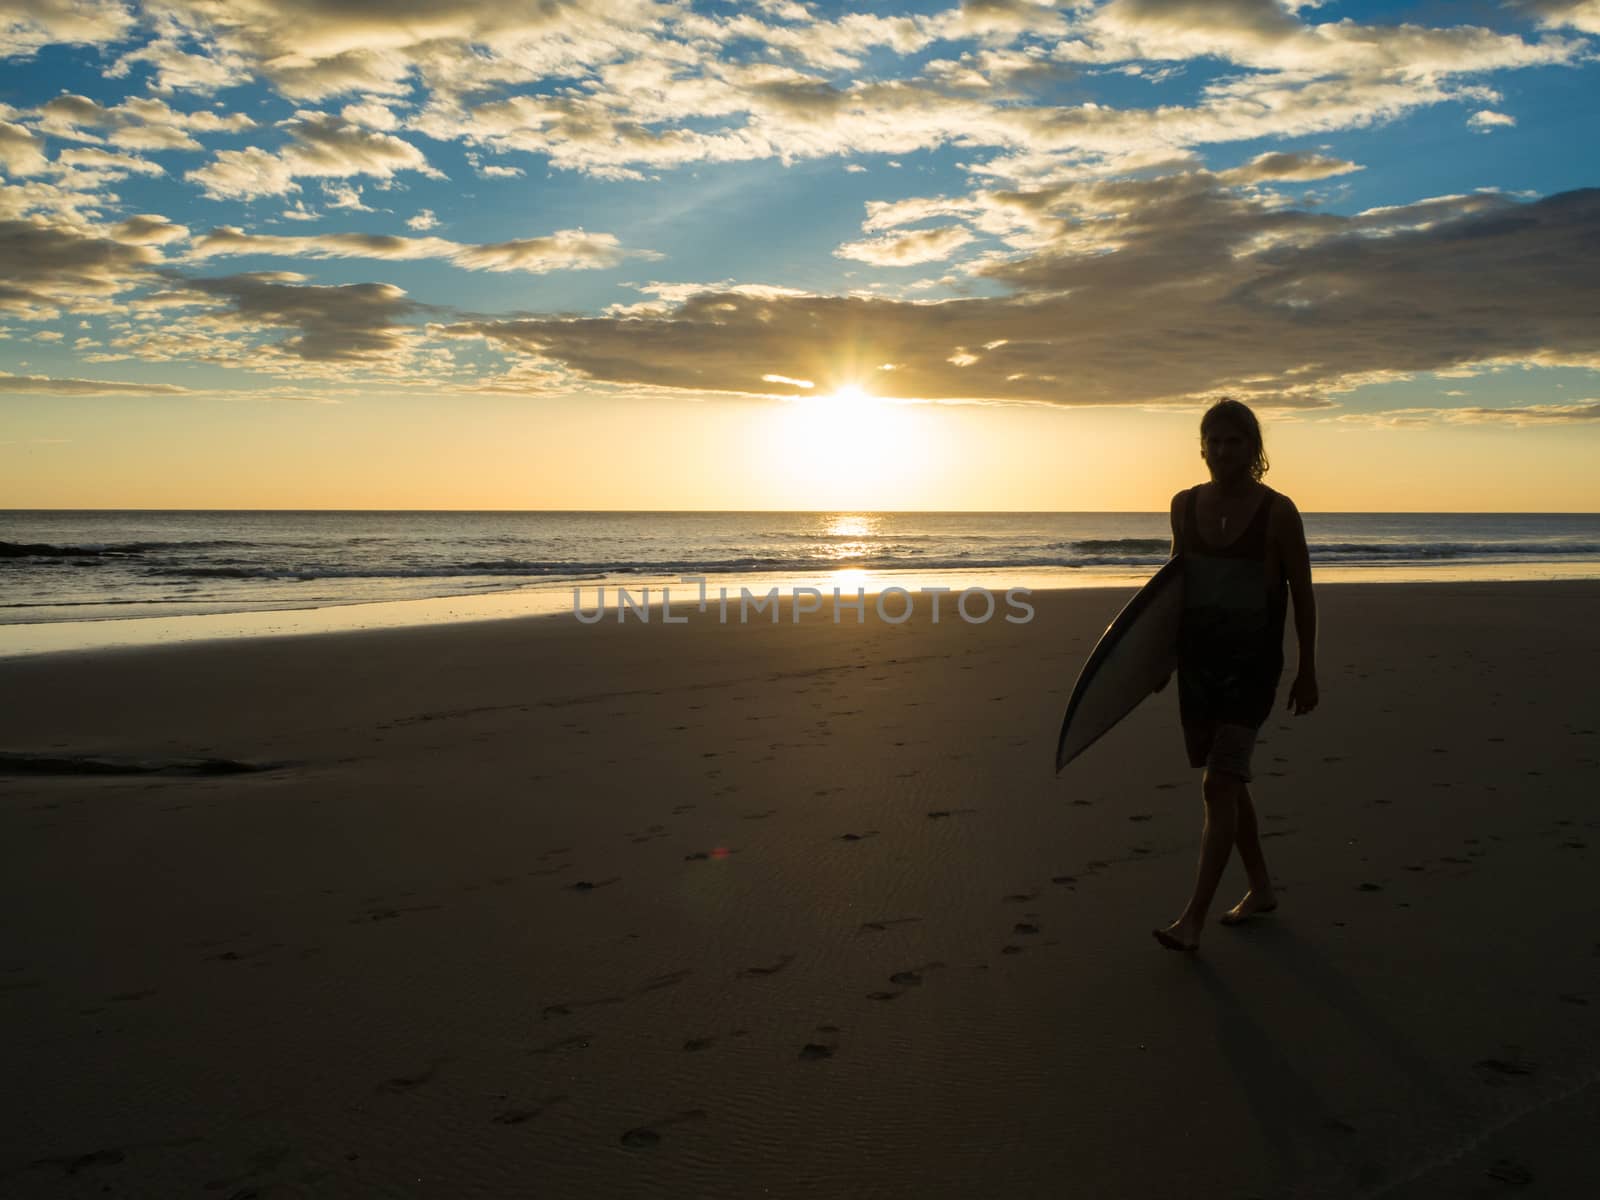 Surfer walks on the beach at the sunrise or sunset